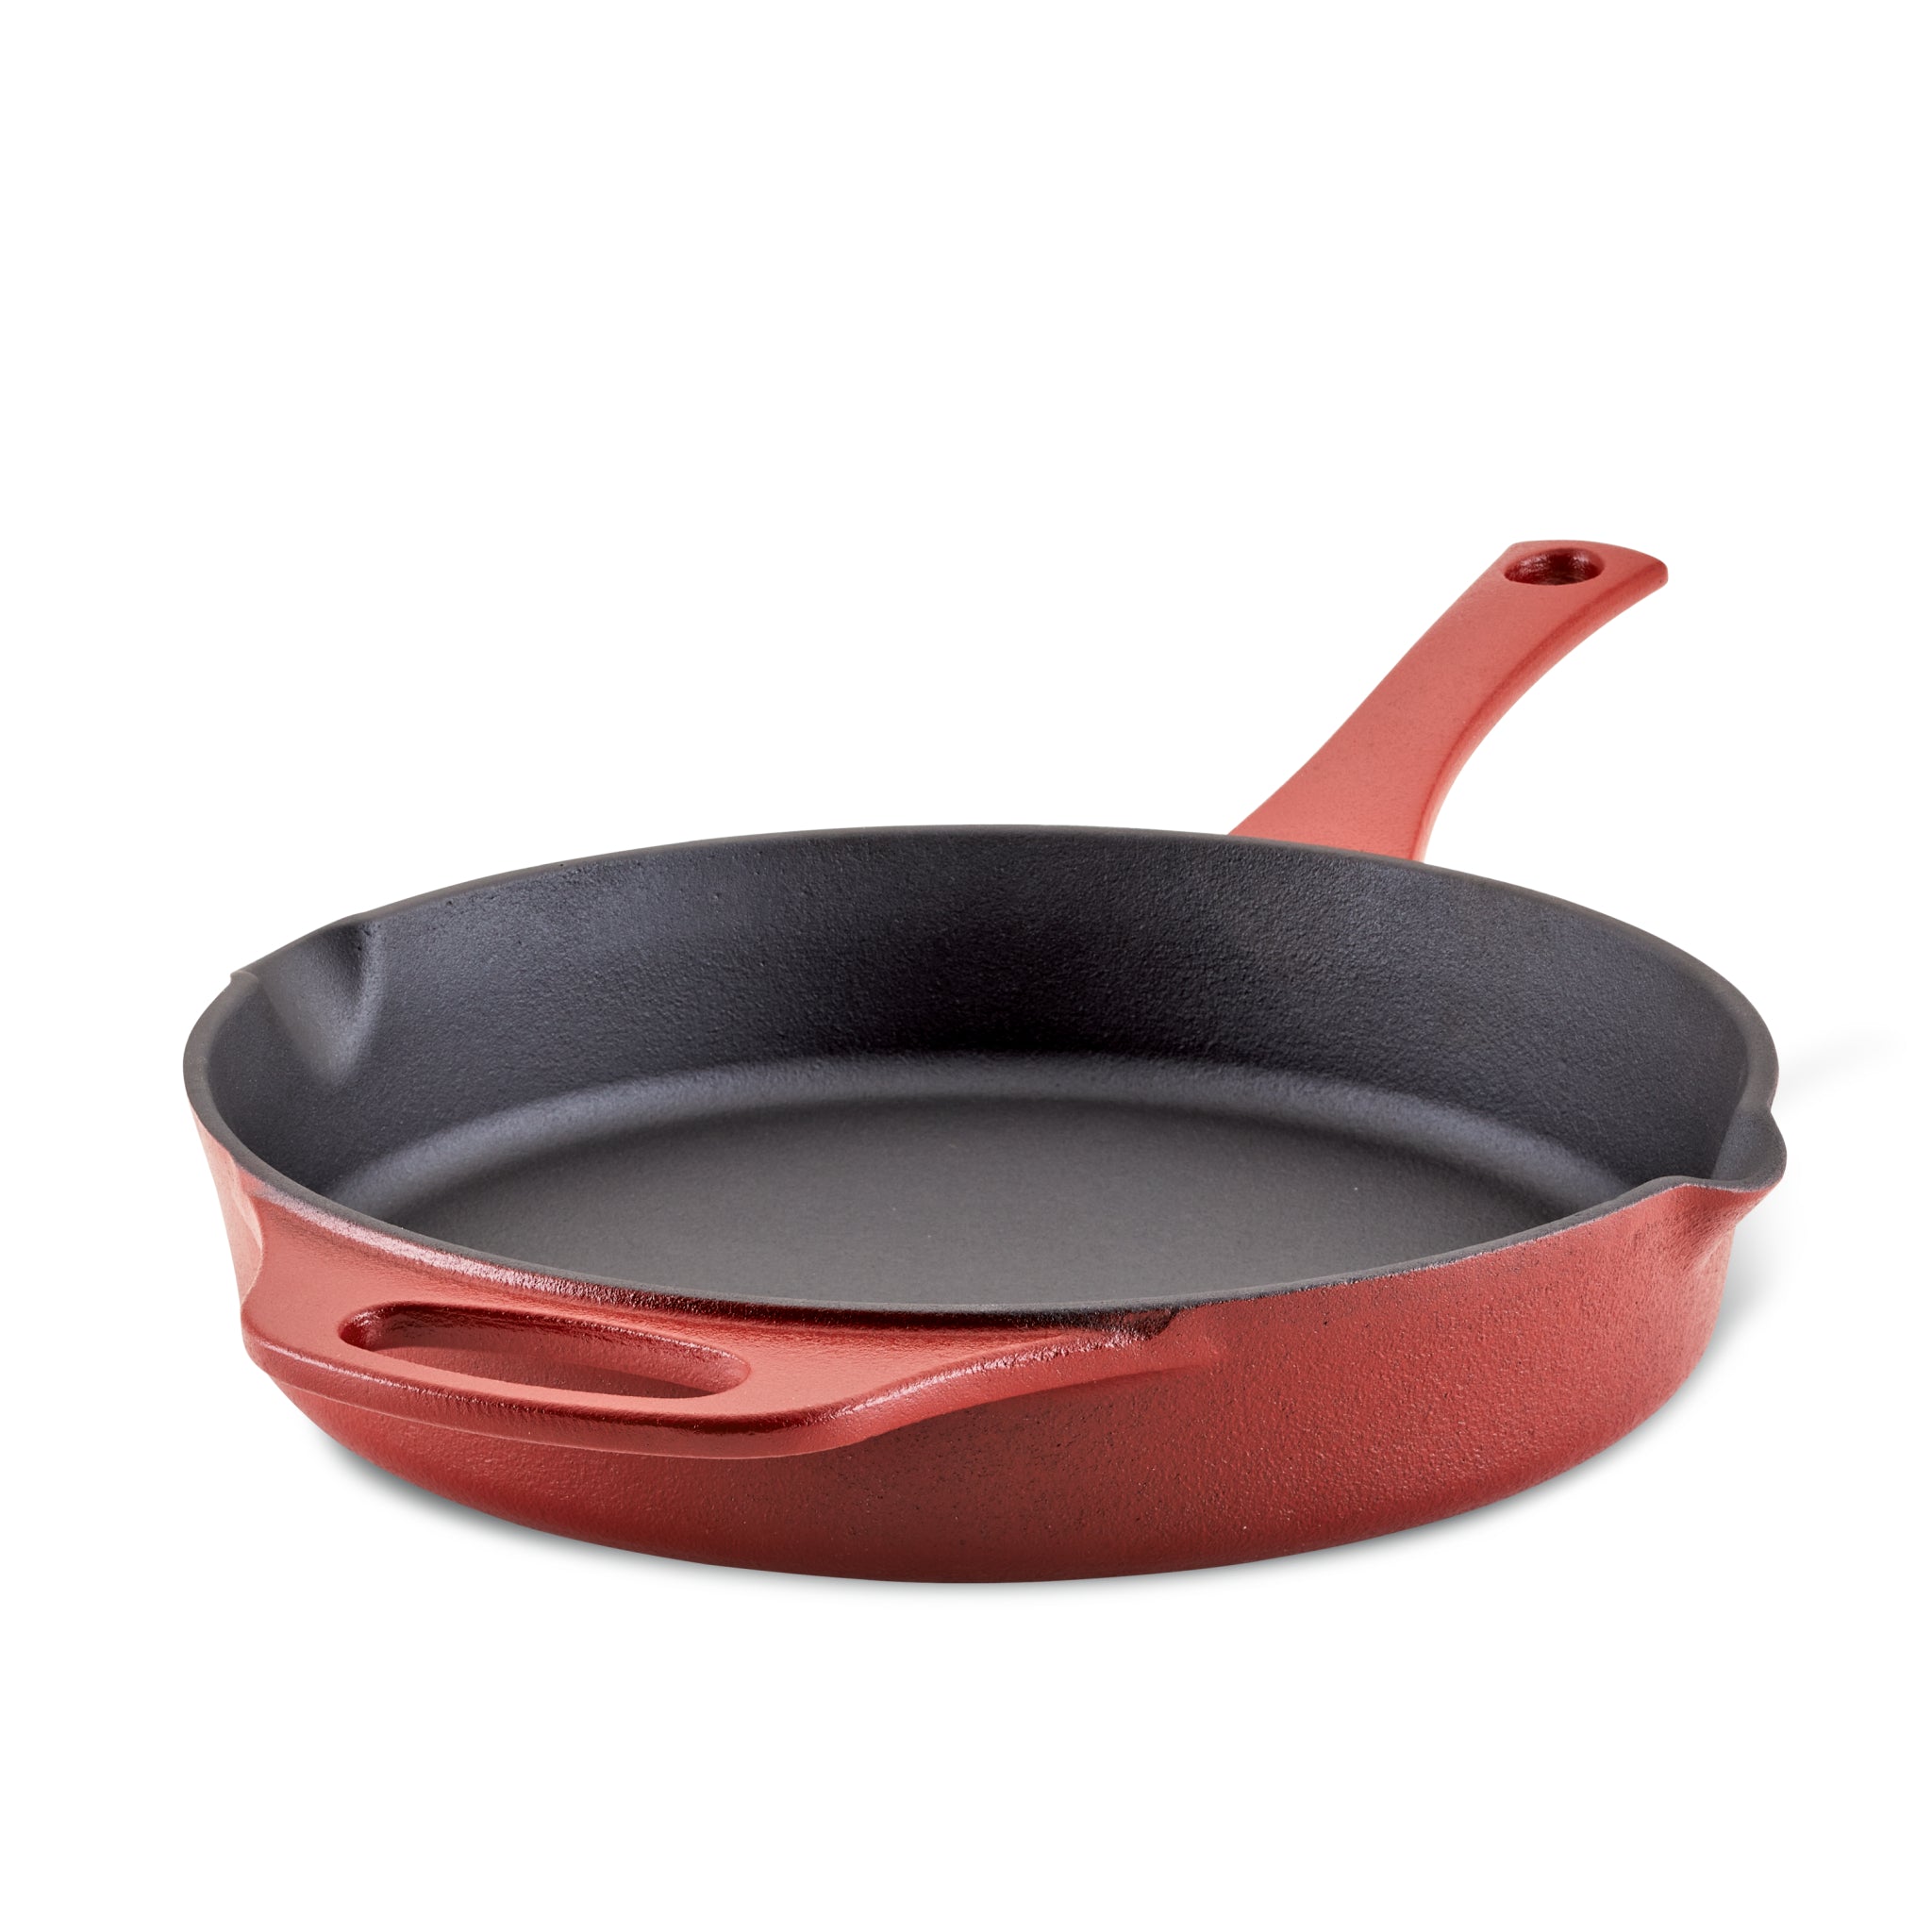 NutriChef 5 Quart Iron Dutch Oven, Red, & 11 Inch Square Cast Iron Skillet,  Red, 1 Piece - Baker's